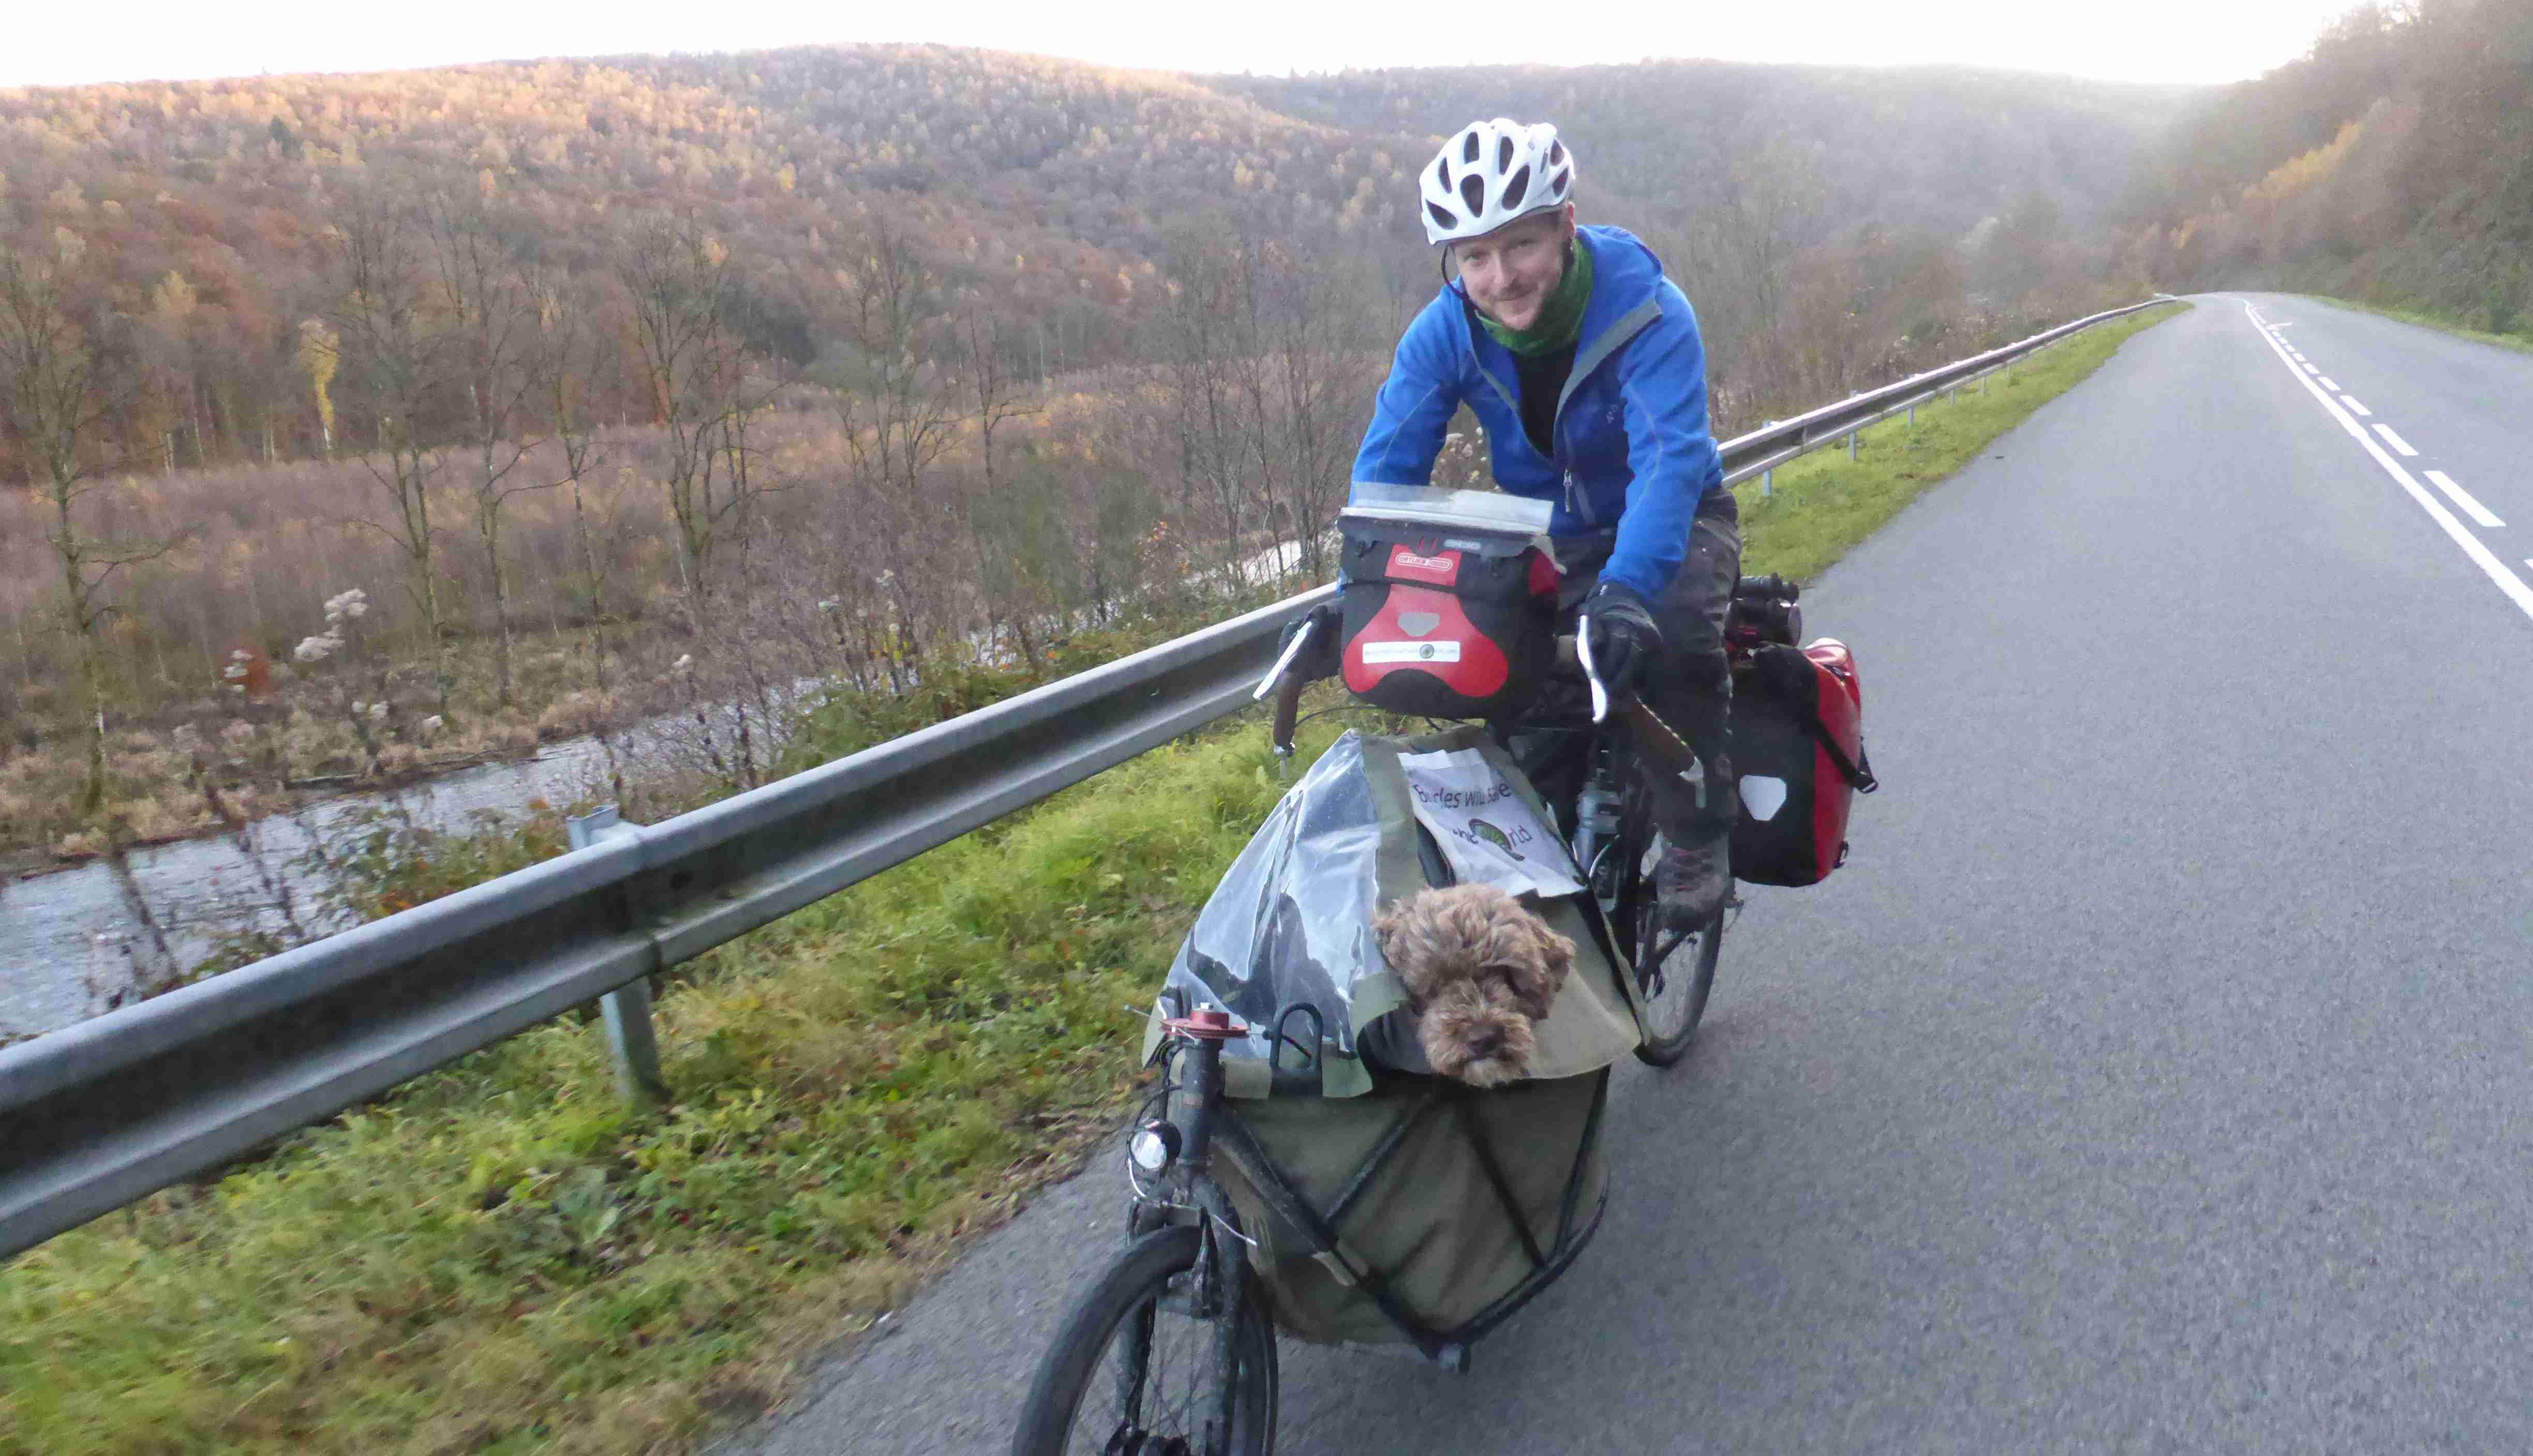 Following the river Semois through the last French Ardennes before entering Belgium